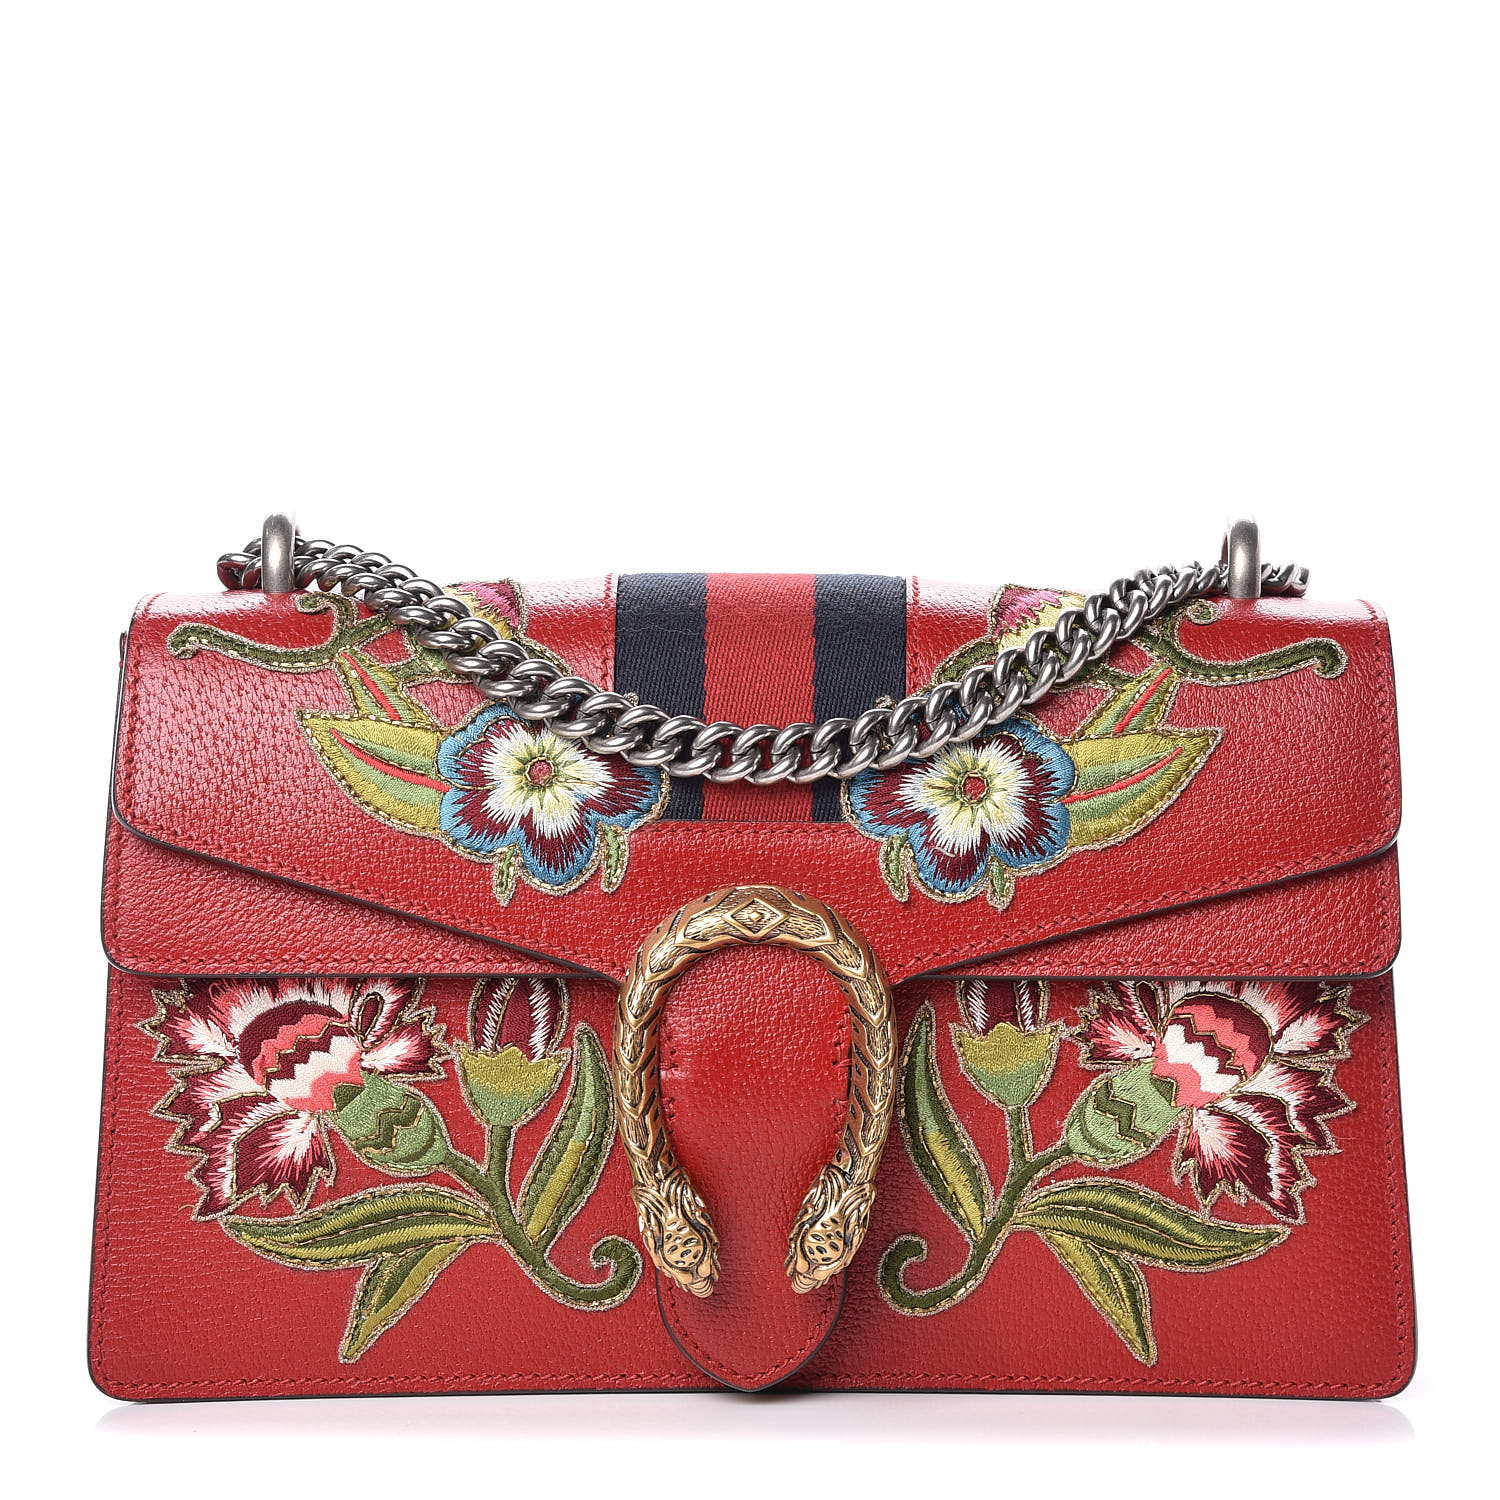 GUCCI Calfskin Small Dionysus Web Floral Embroidered Shoulder Bag Hibiscus Red 410157